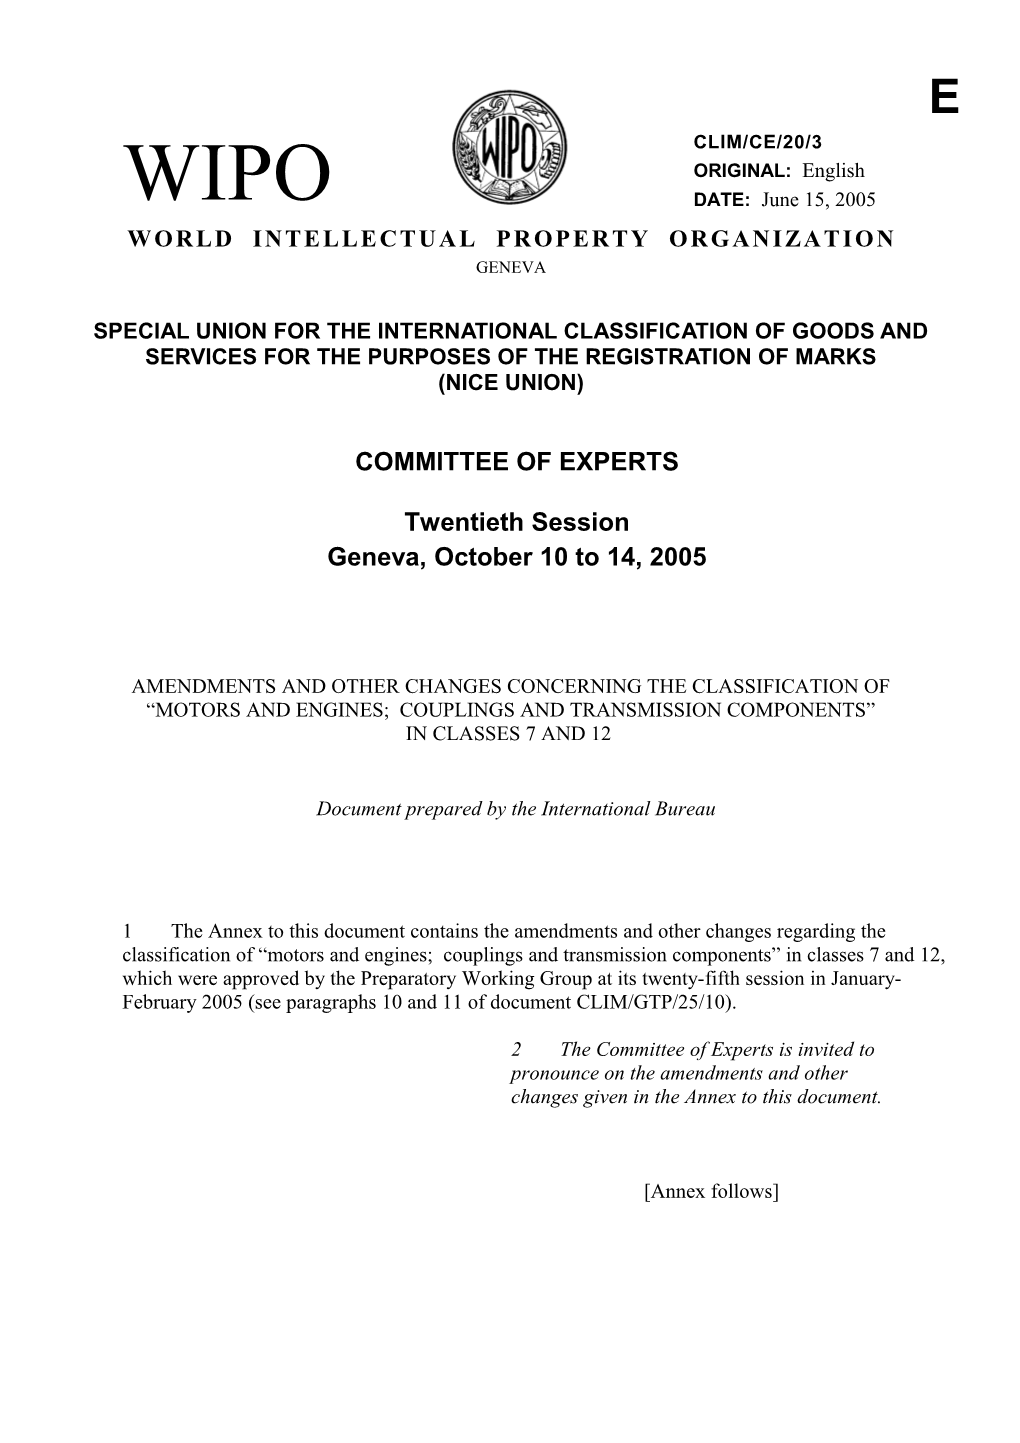 CLIM/CE/20/3: Amendments and Other Changes Concerning the Classificaiton of Motors And